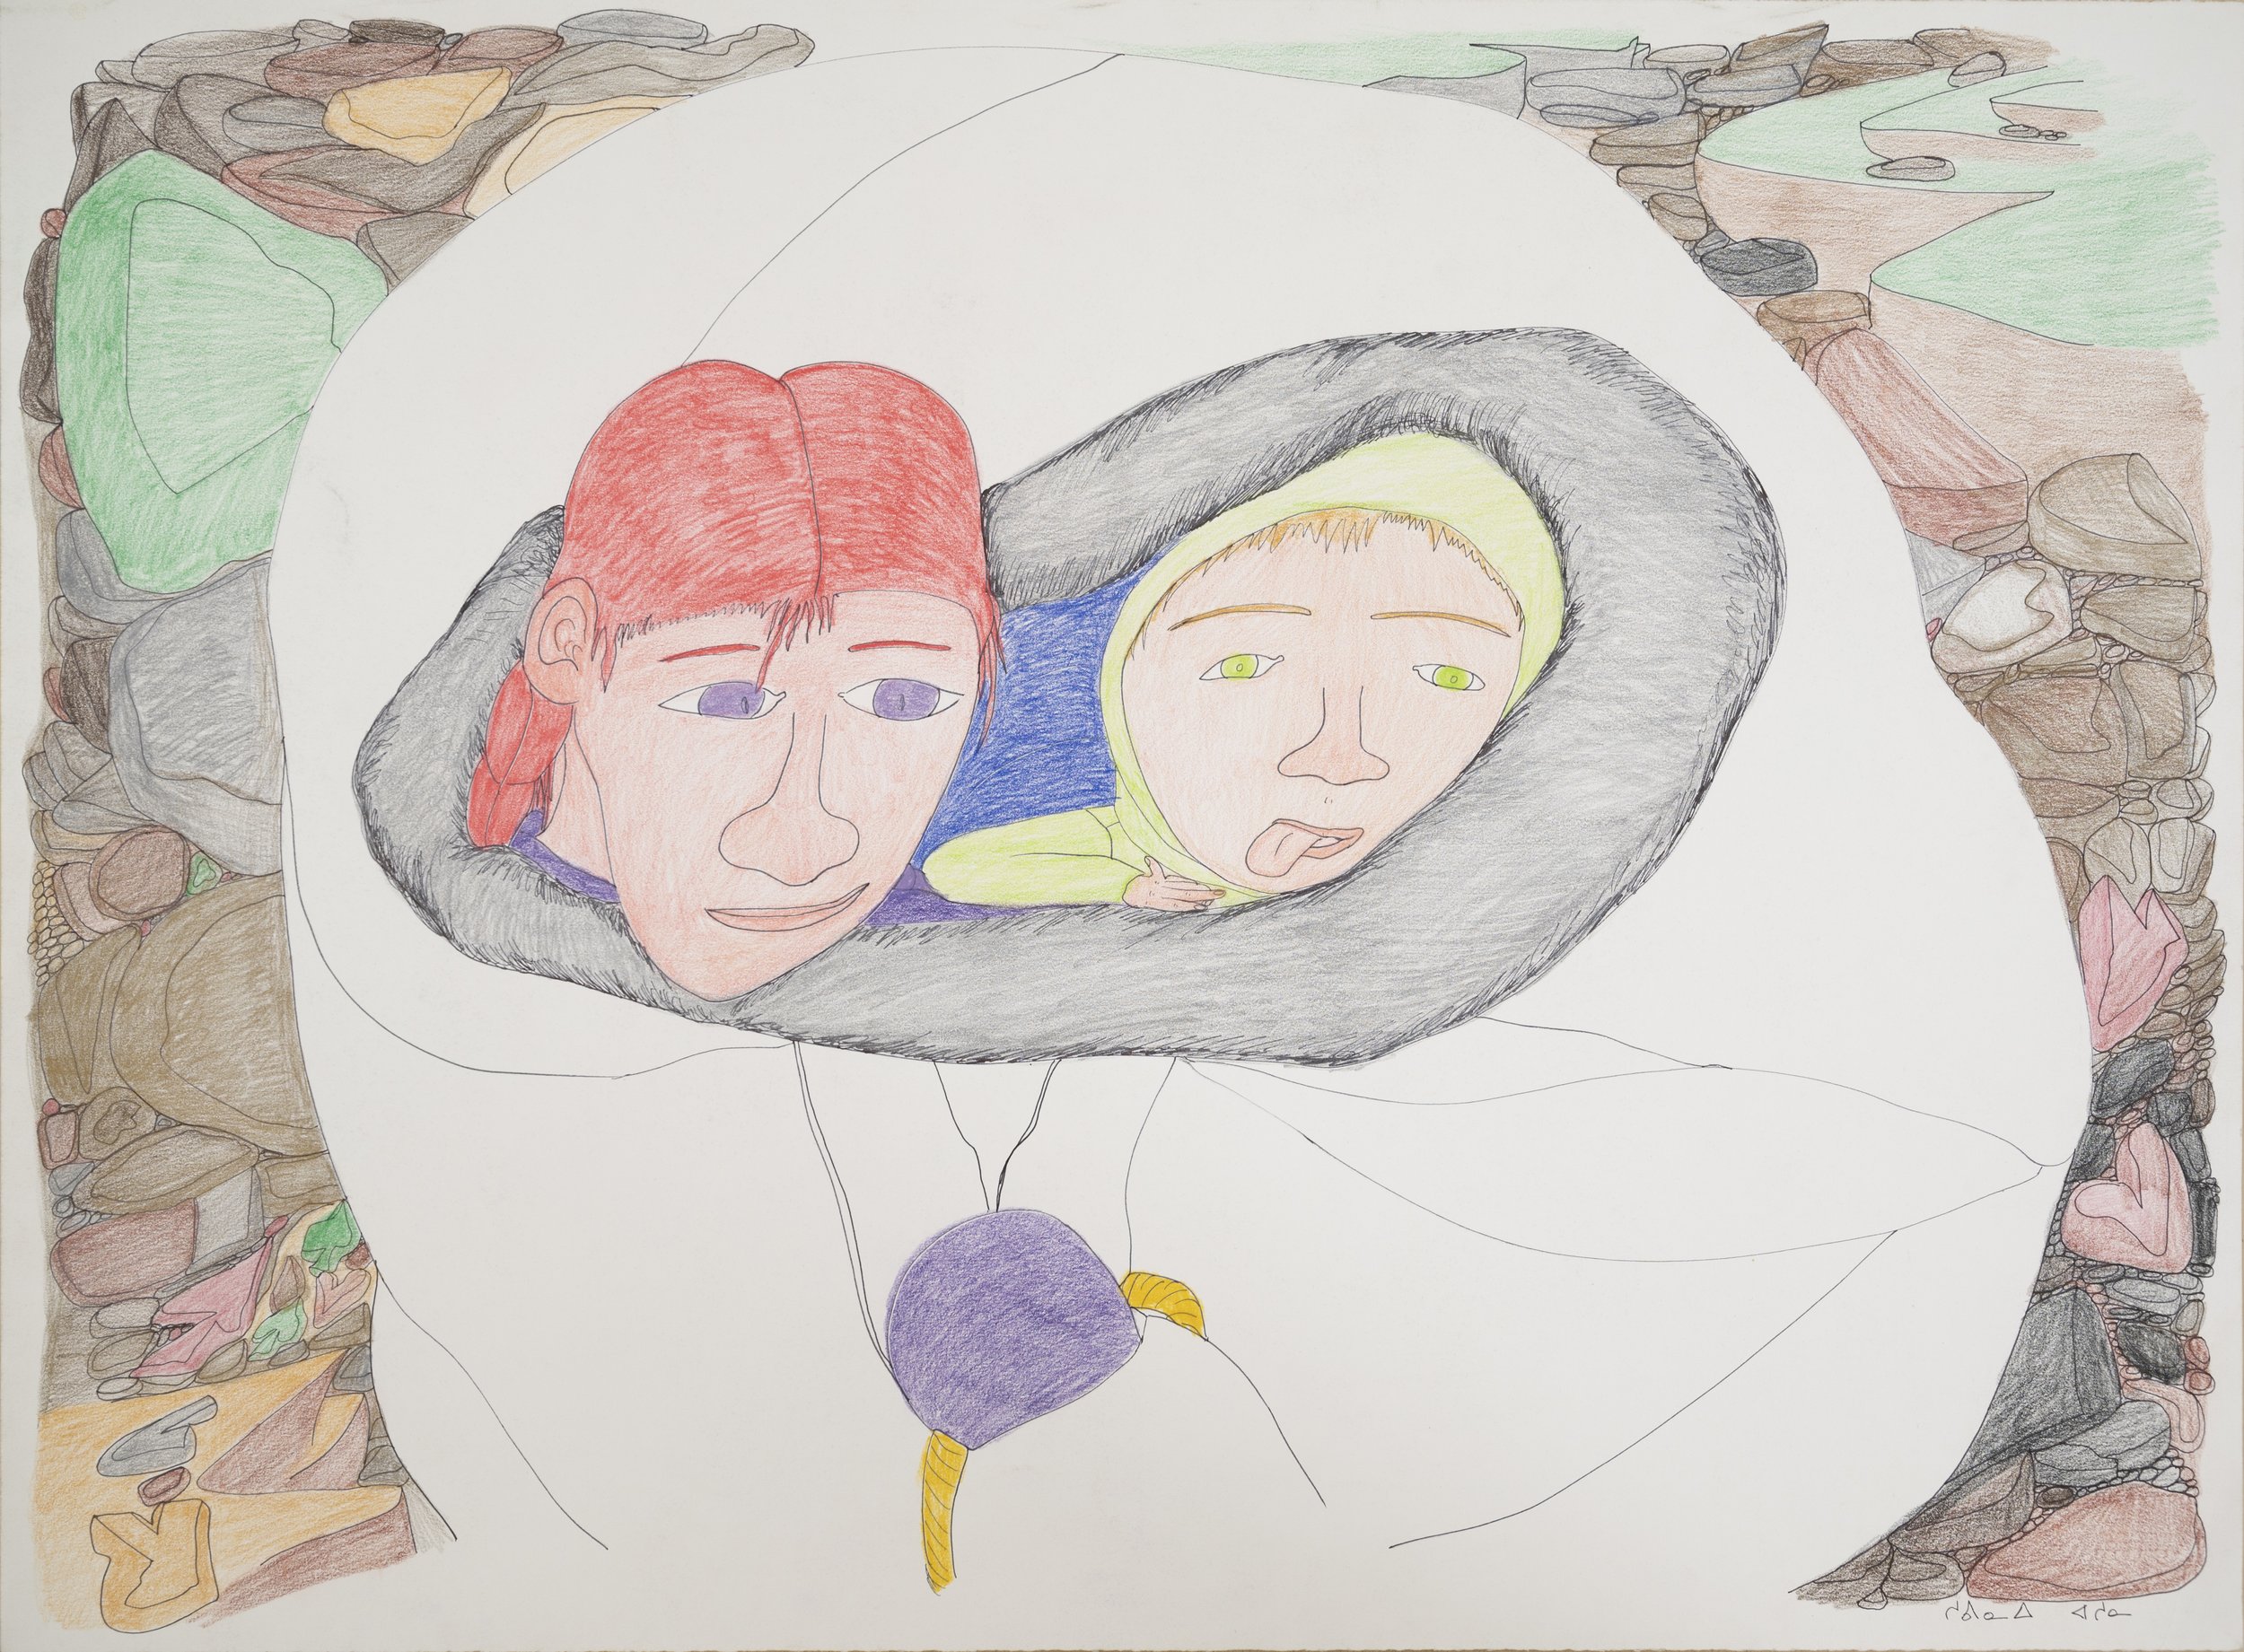   Untitled  (2008/09), colour pencil and ink on paper 